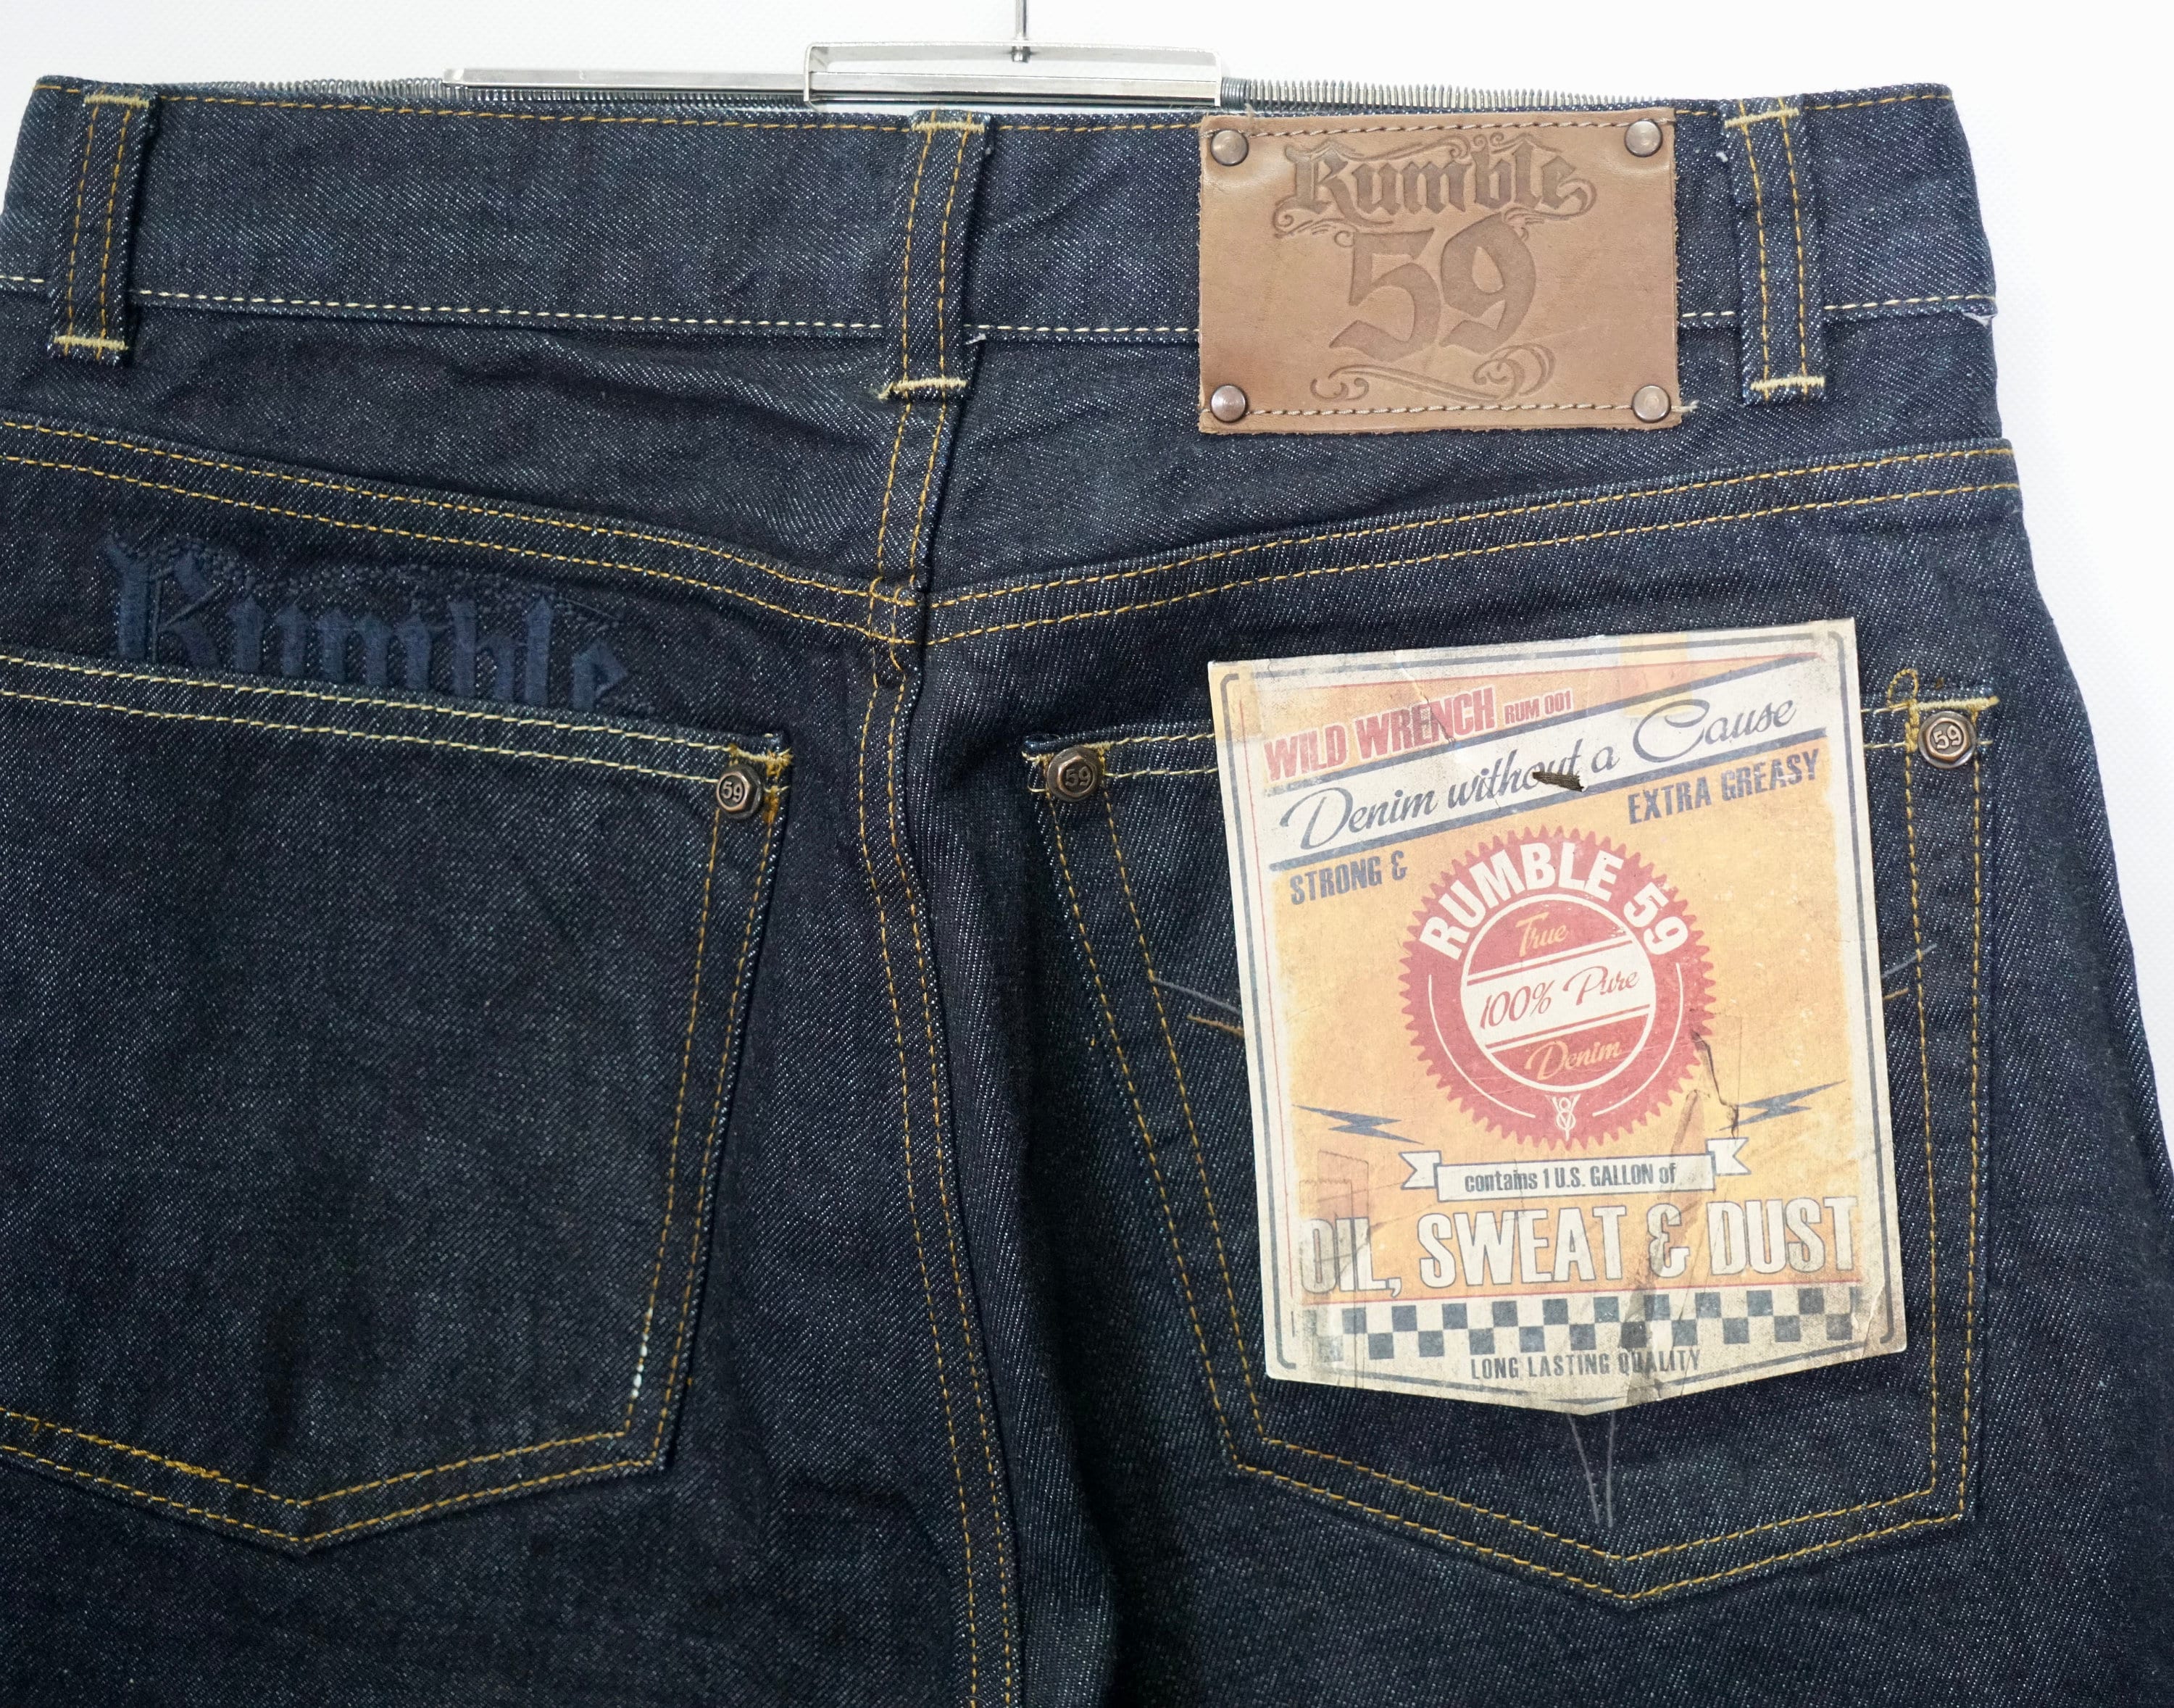 Vintage Loose Fit Pants New Jersey  Rumble59 - Official Rumble59 Shop for  Jeans, Jackets & Clothing